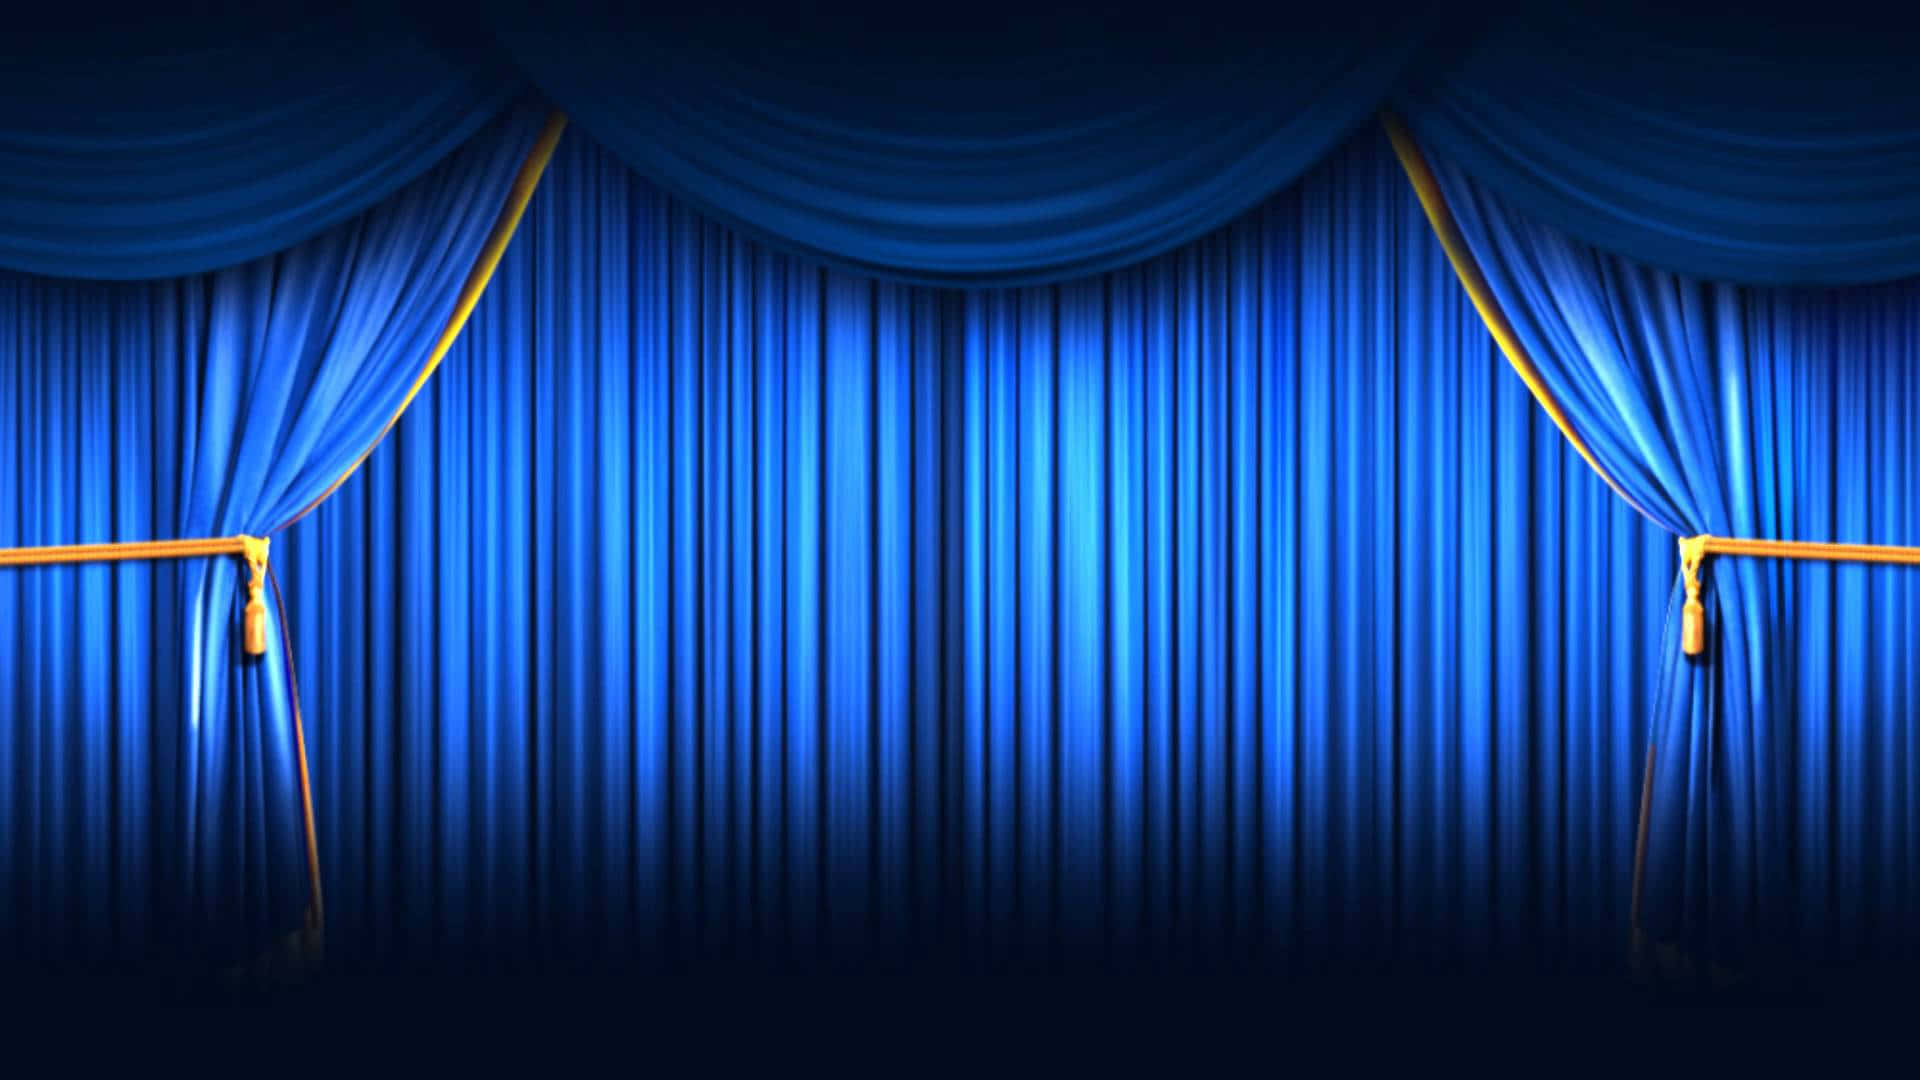 Blue And Gold Curtain Theatre Stage Wallpaper